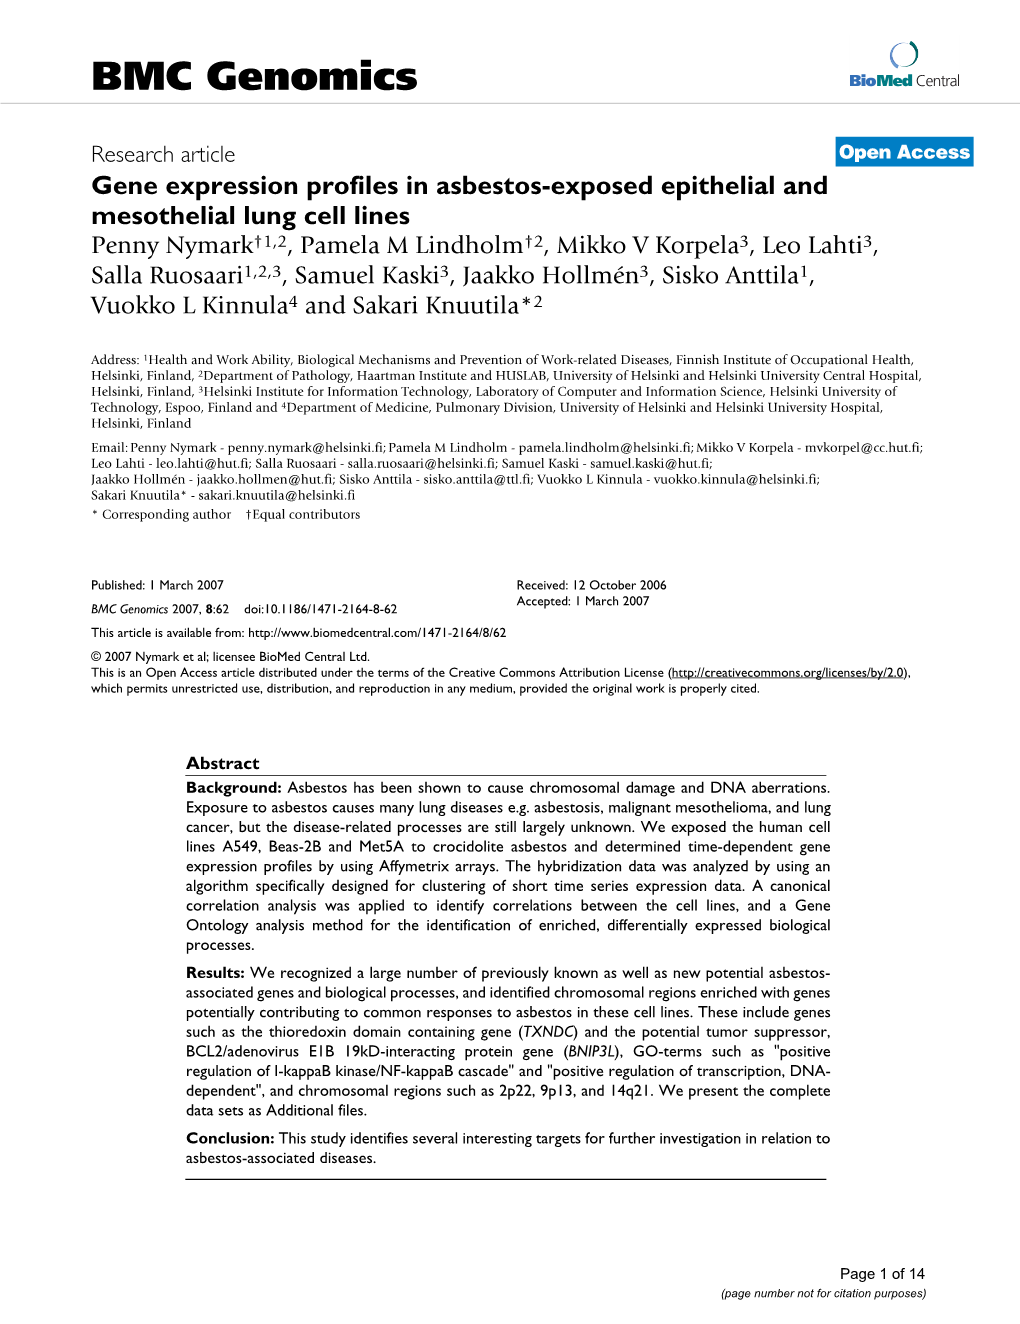 Gene Expression Profiles in Asbestos-Exposed Epithelial And